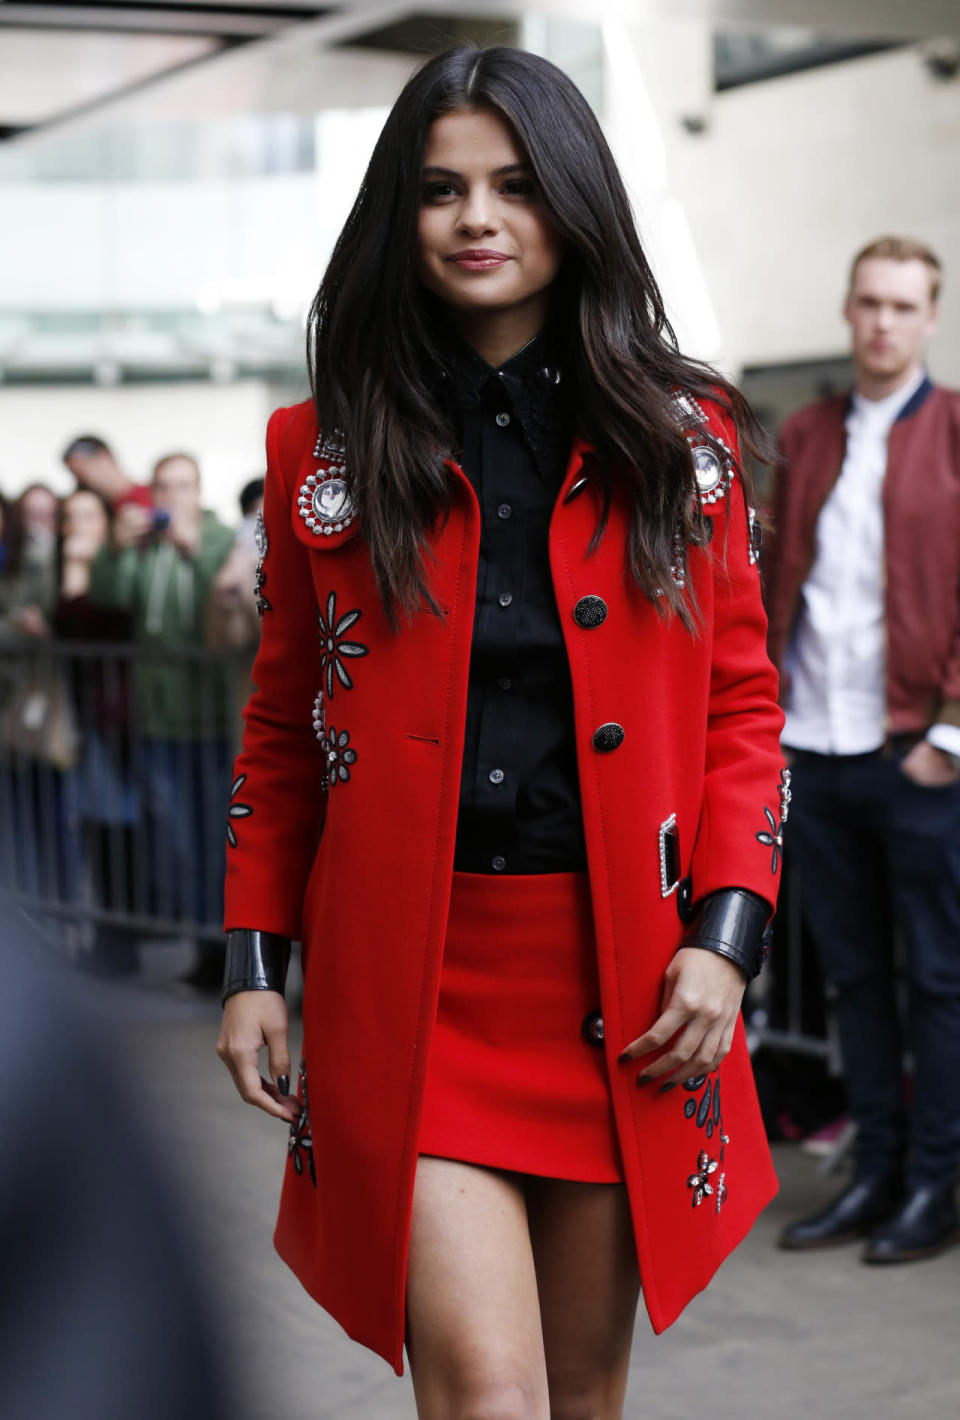 Finally, she changed into a matching pillar-box red two-piece, featuring a long red jacket with floral embellishments and paired it with a matching mini skirt and black button down blouse. [Photo: Getty]